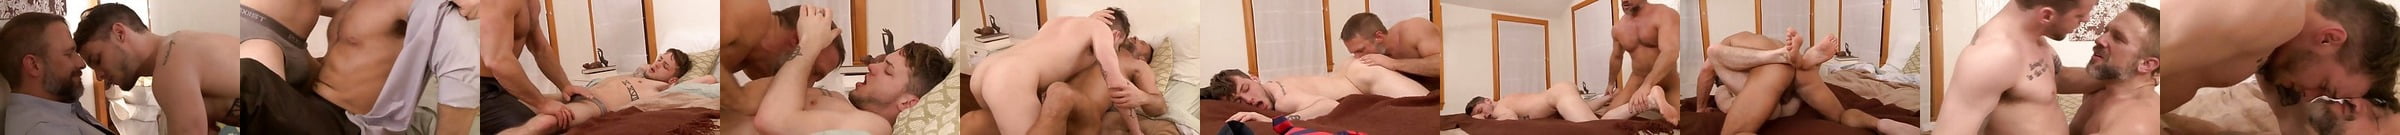 Fuck Me Daddy Iv Missionary Compilation Free Gay Porn A8 Xhamster